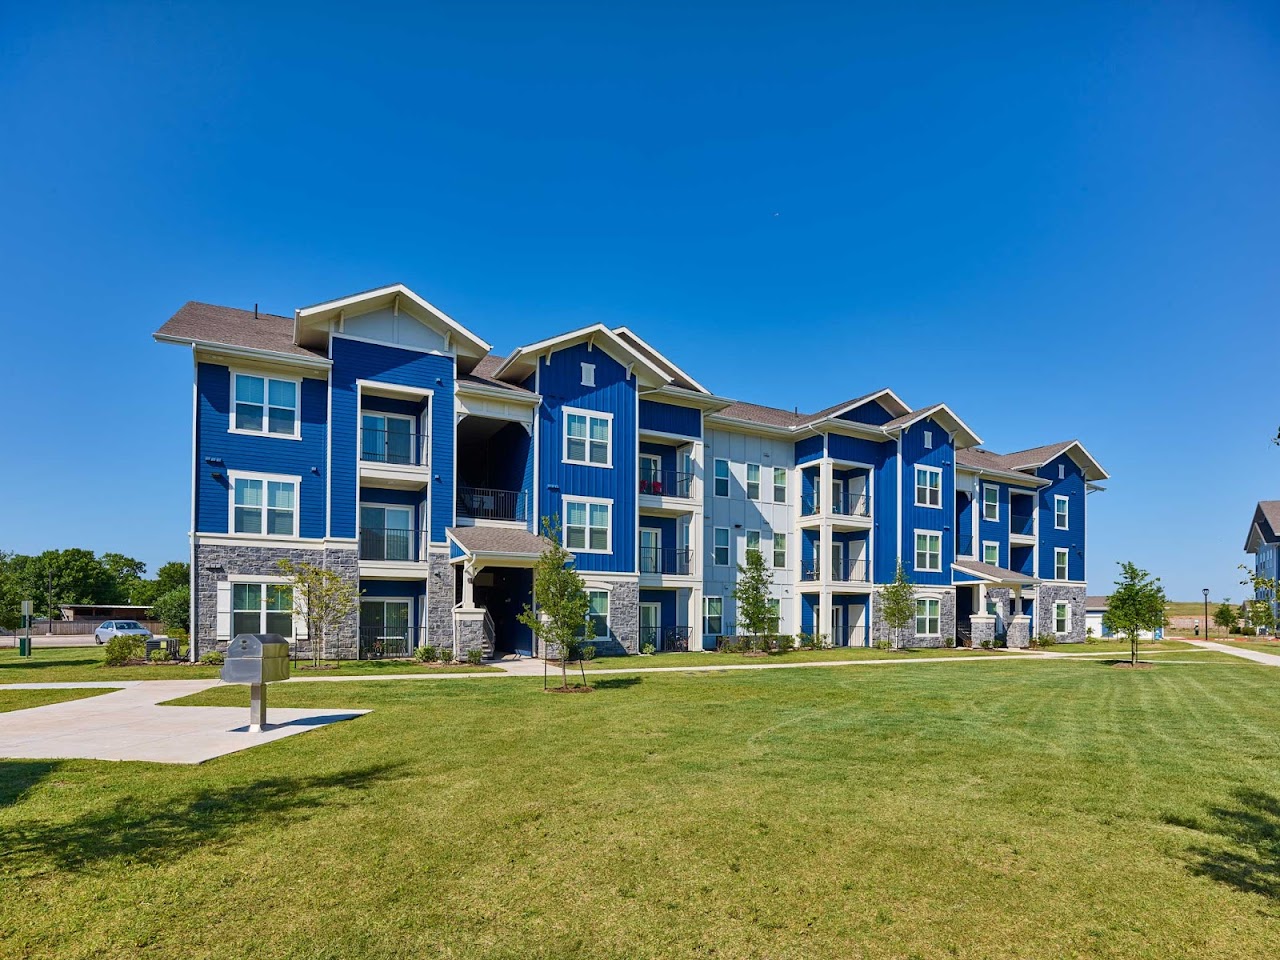 Photo of TERRACES AT ARBORETUM. Affordable housing located at 15928 OLD RICHMOND ROAD SUGAR LAND, TX 77498